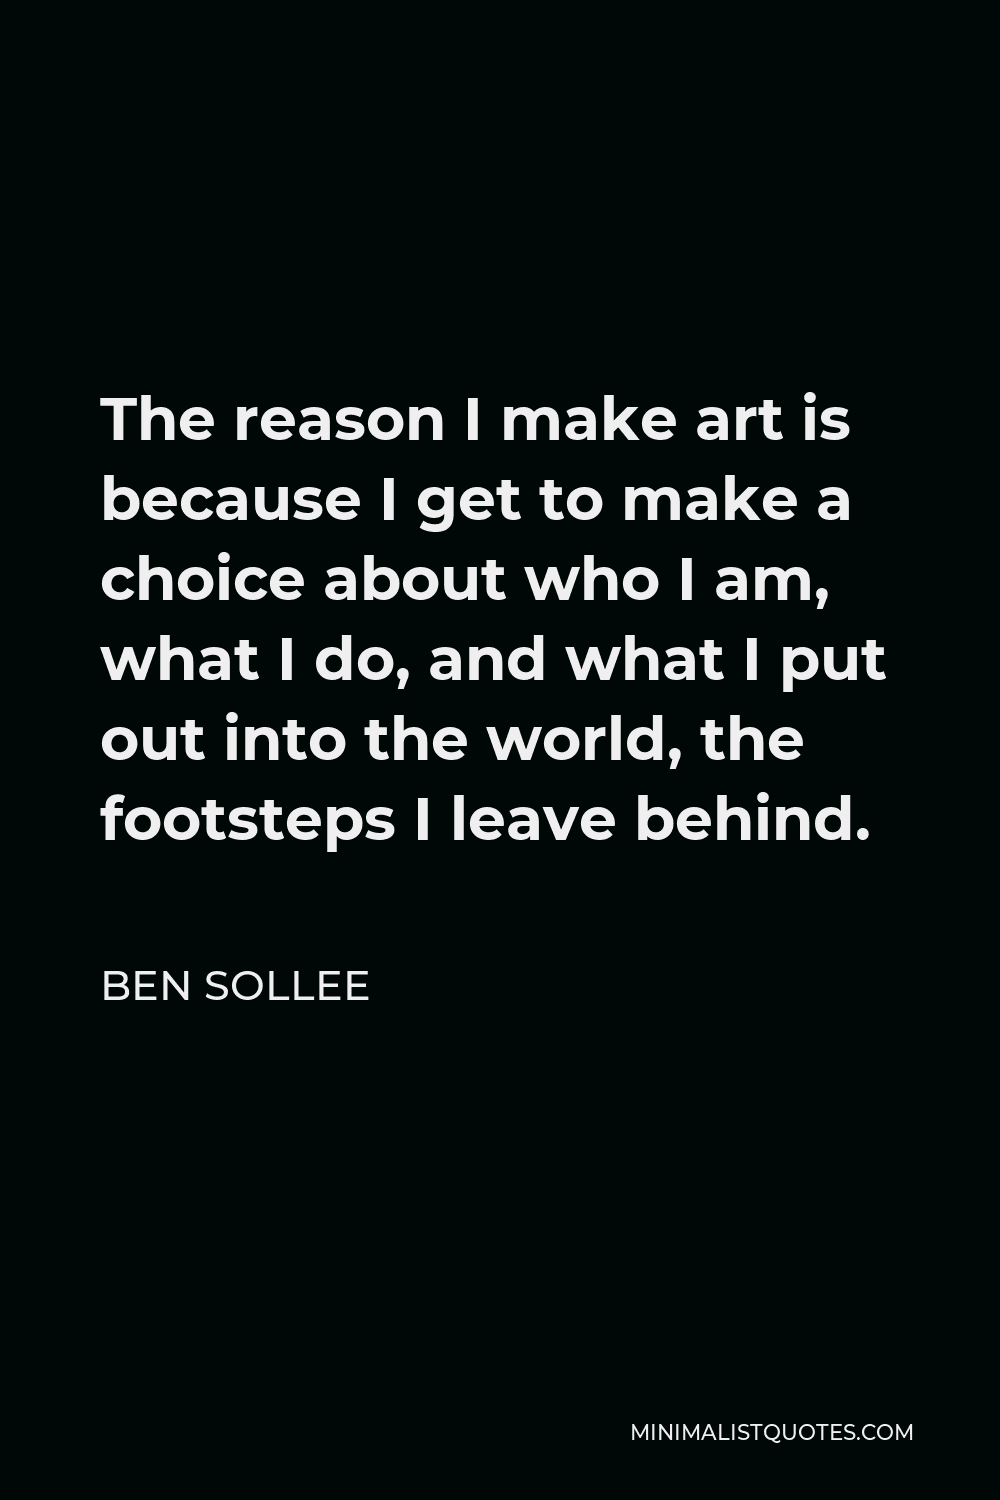 Ben Sollee Quote - The reason I make art is because I get to make a choice about who I am, what I do, and what I put out into the world, the footsteps I leave behind.